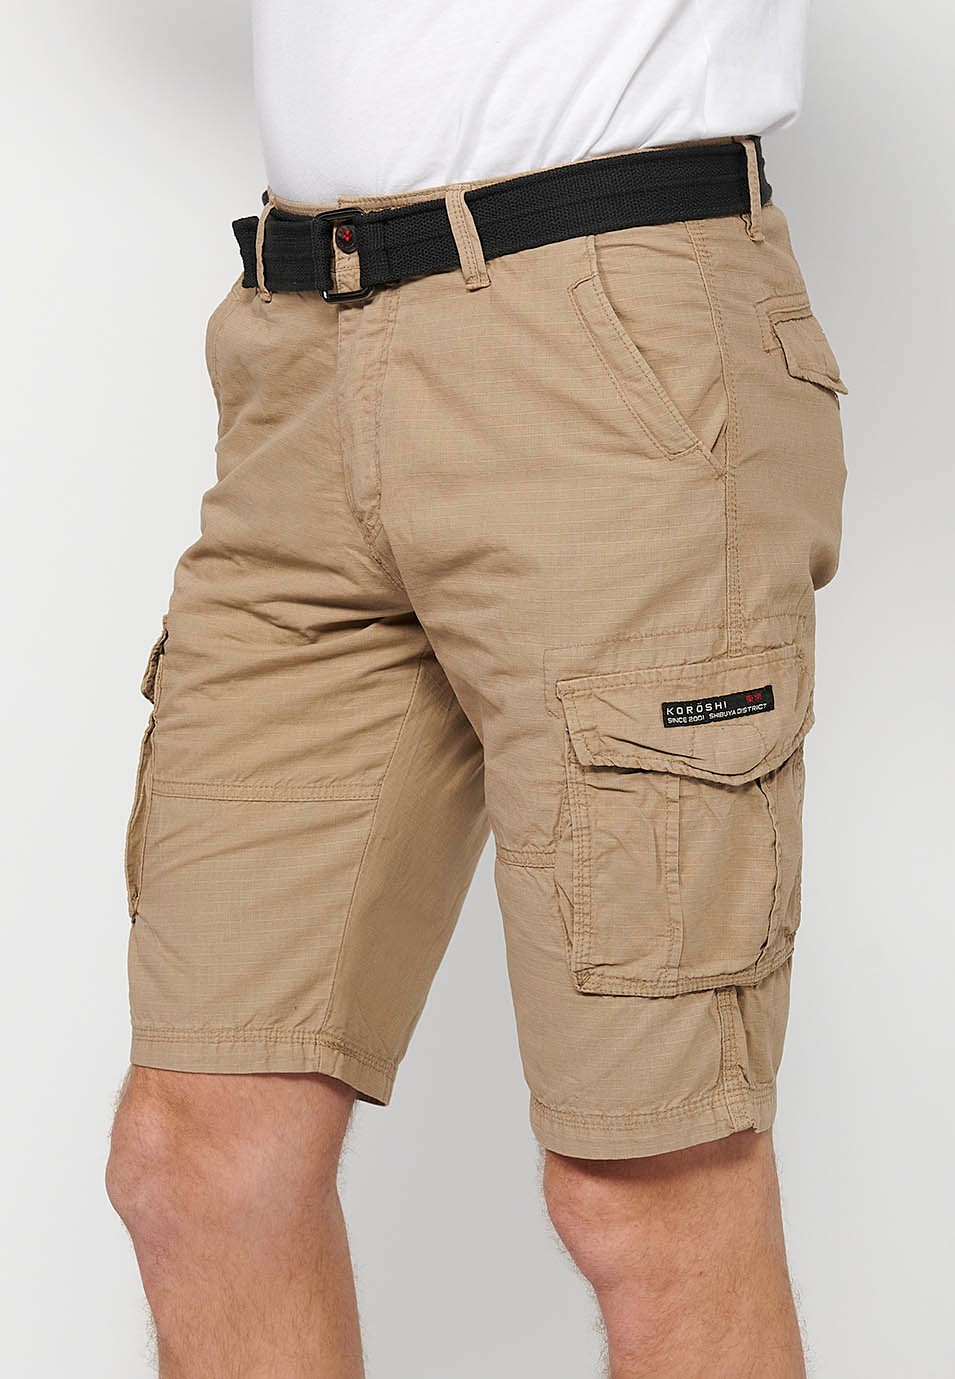 Cotton cargo shorts with belt and front closure with zipper and button with pockets, two back pockets with flap and two cargo pants in Beige Color for Men 3